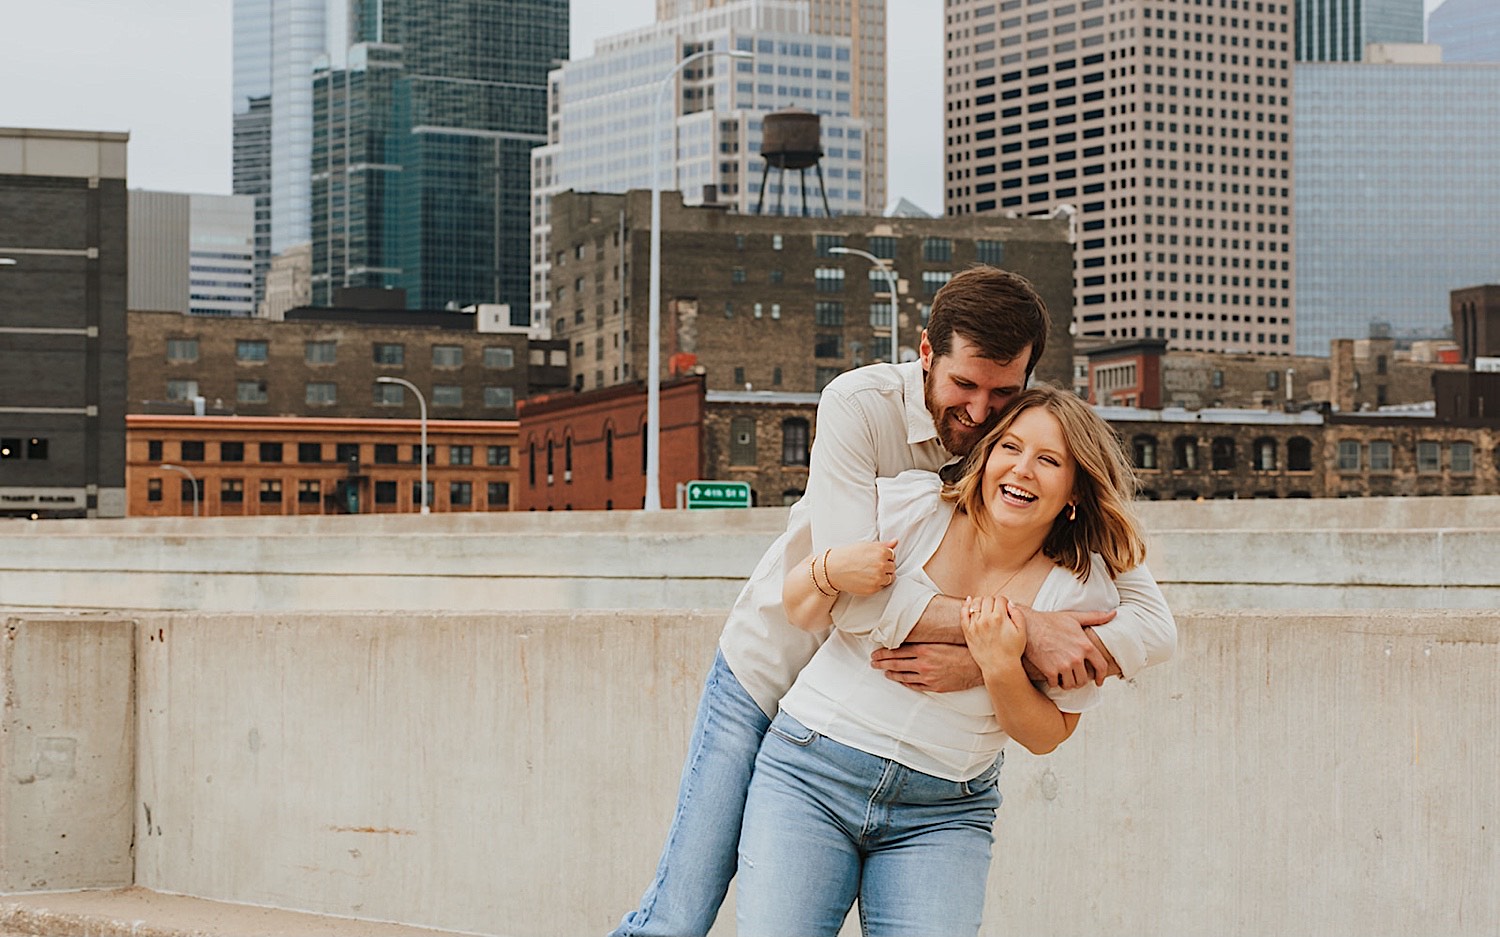 While on the top of a parking garage in downtown Minneapolis a man hugs a woman from behind as she smiles while they take their engagement photos